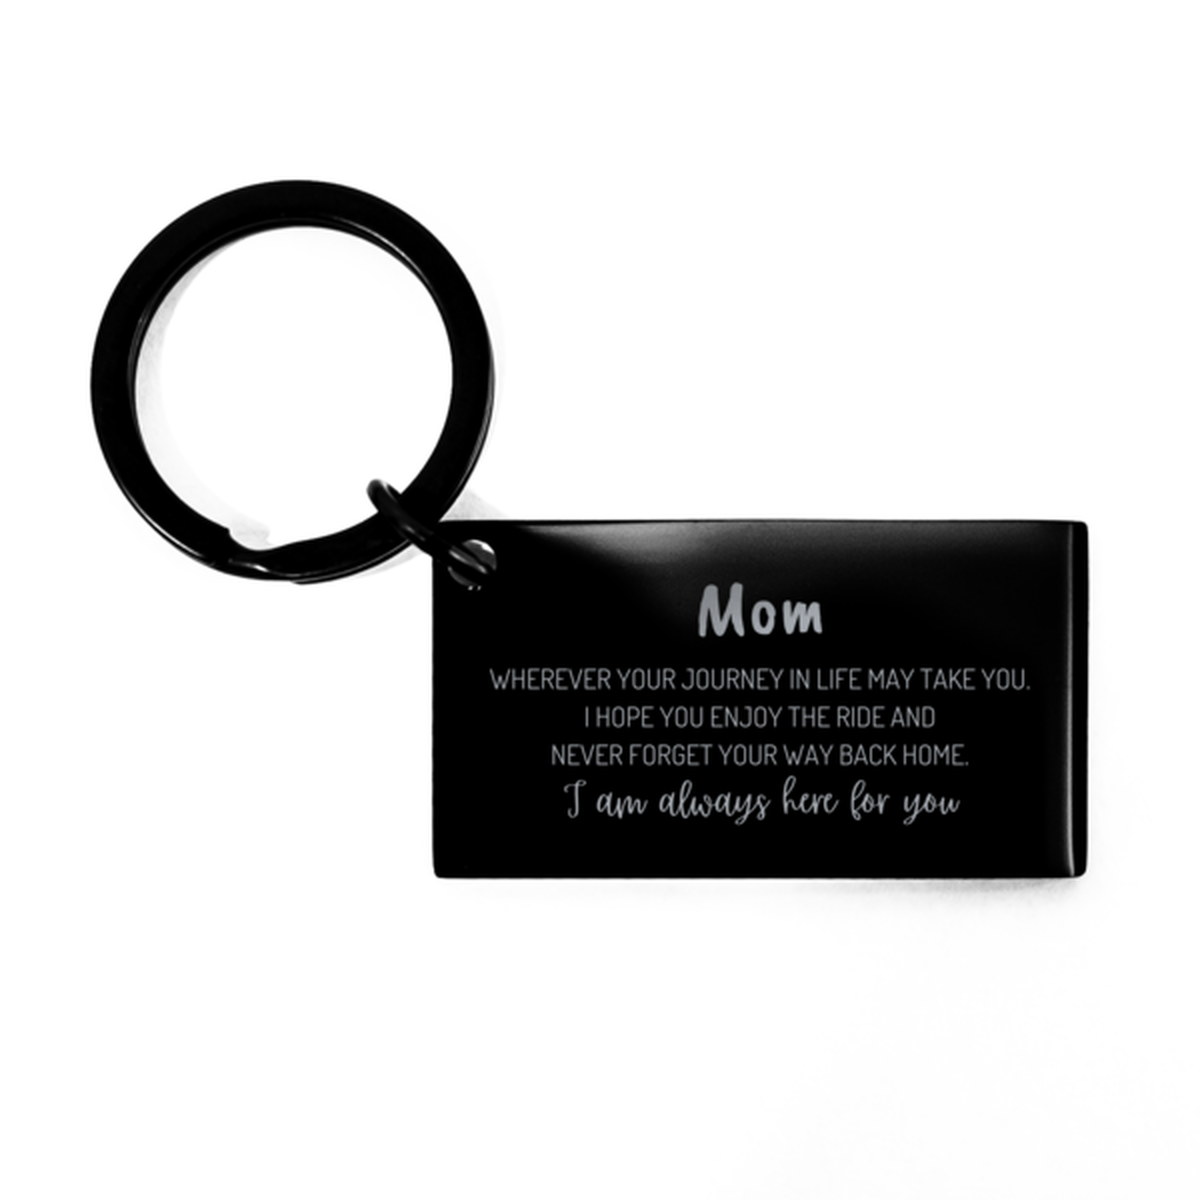 Mom wherever your journey in life may take you, I am always here for you Mom Keychain, Awesome Christmas Gifts For Mom, Mom Birthday Gifts for Men Women Family Loved One